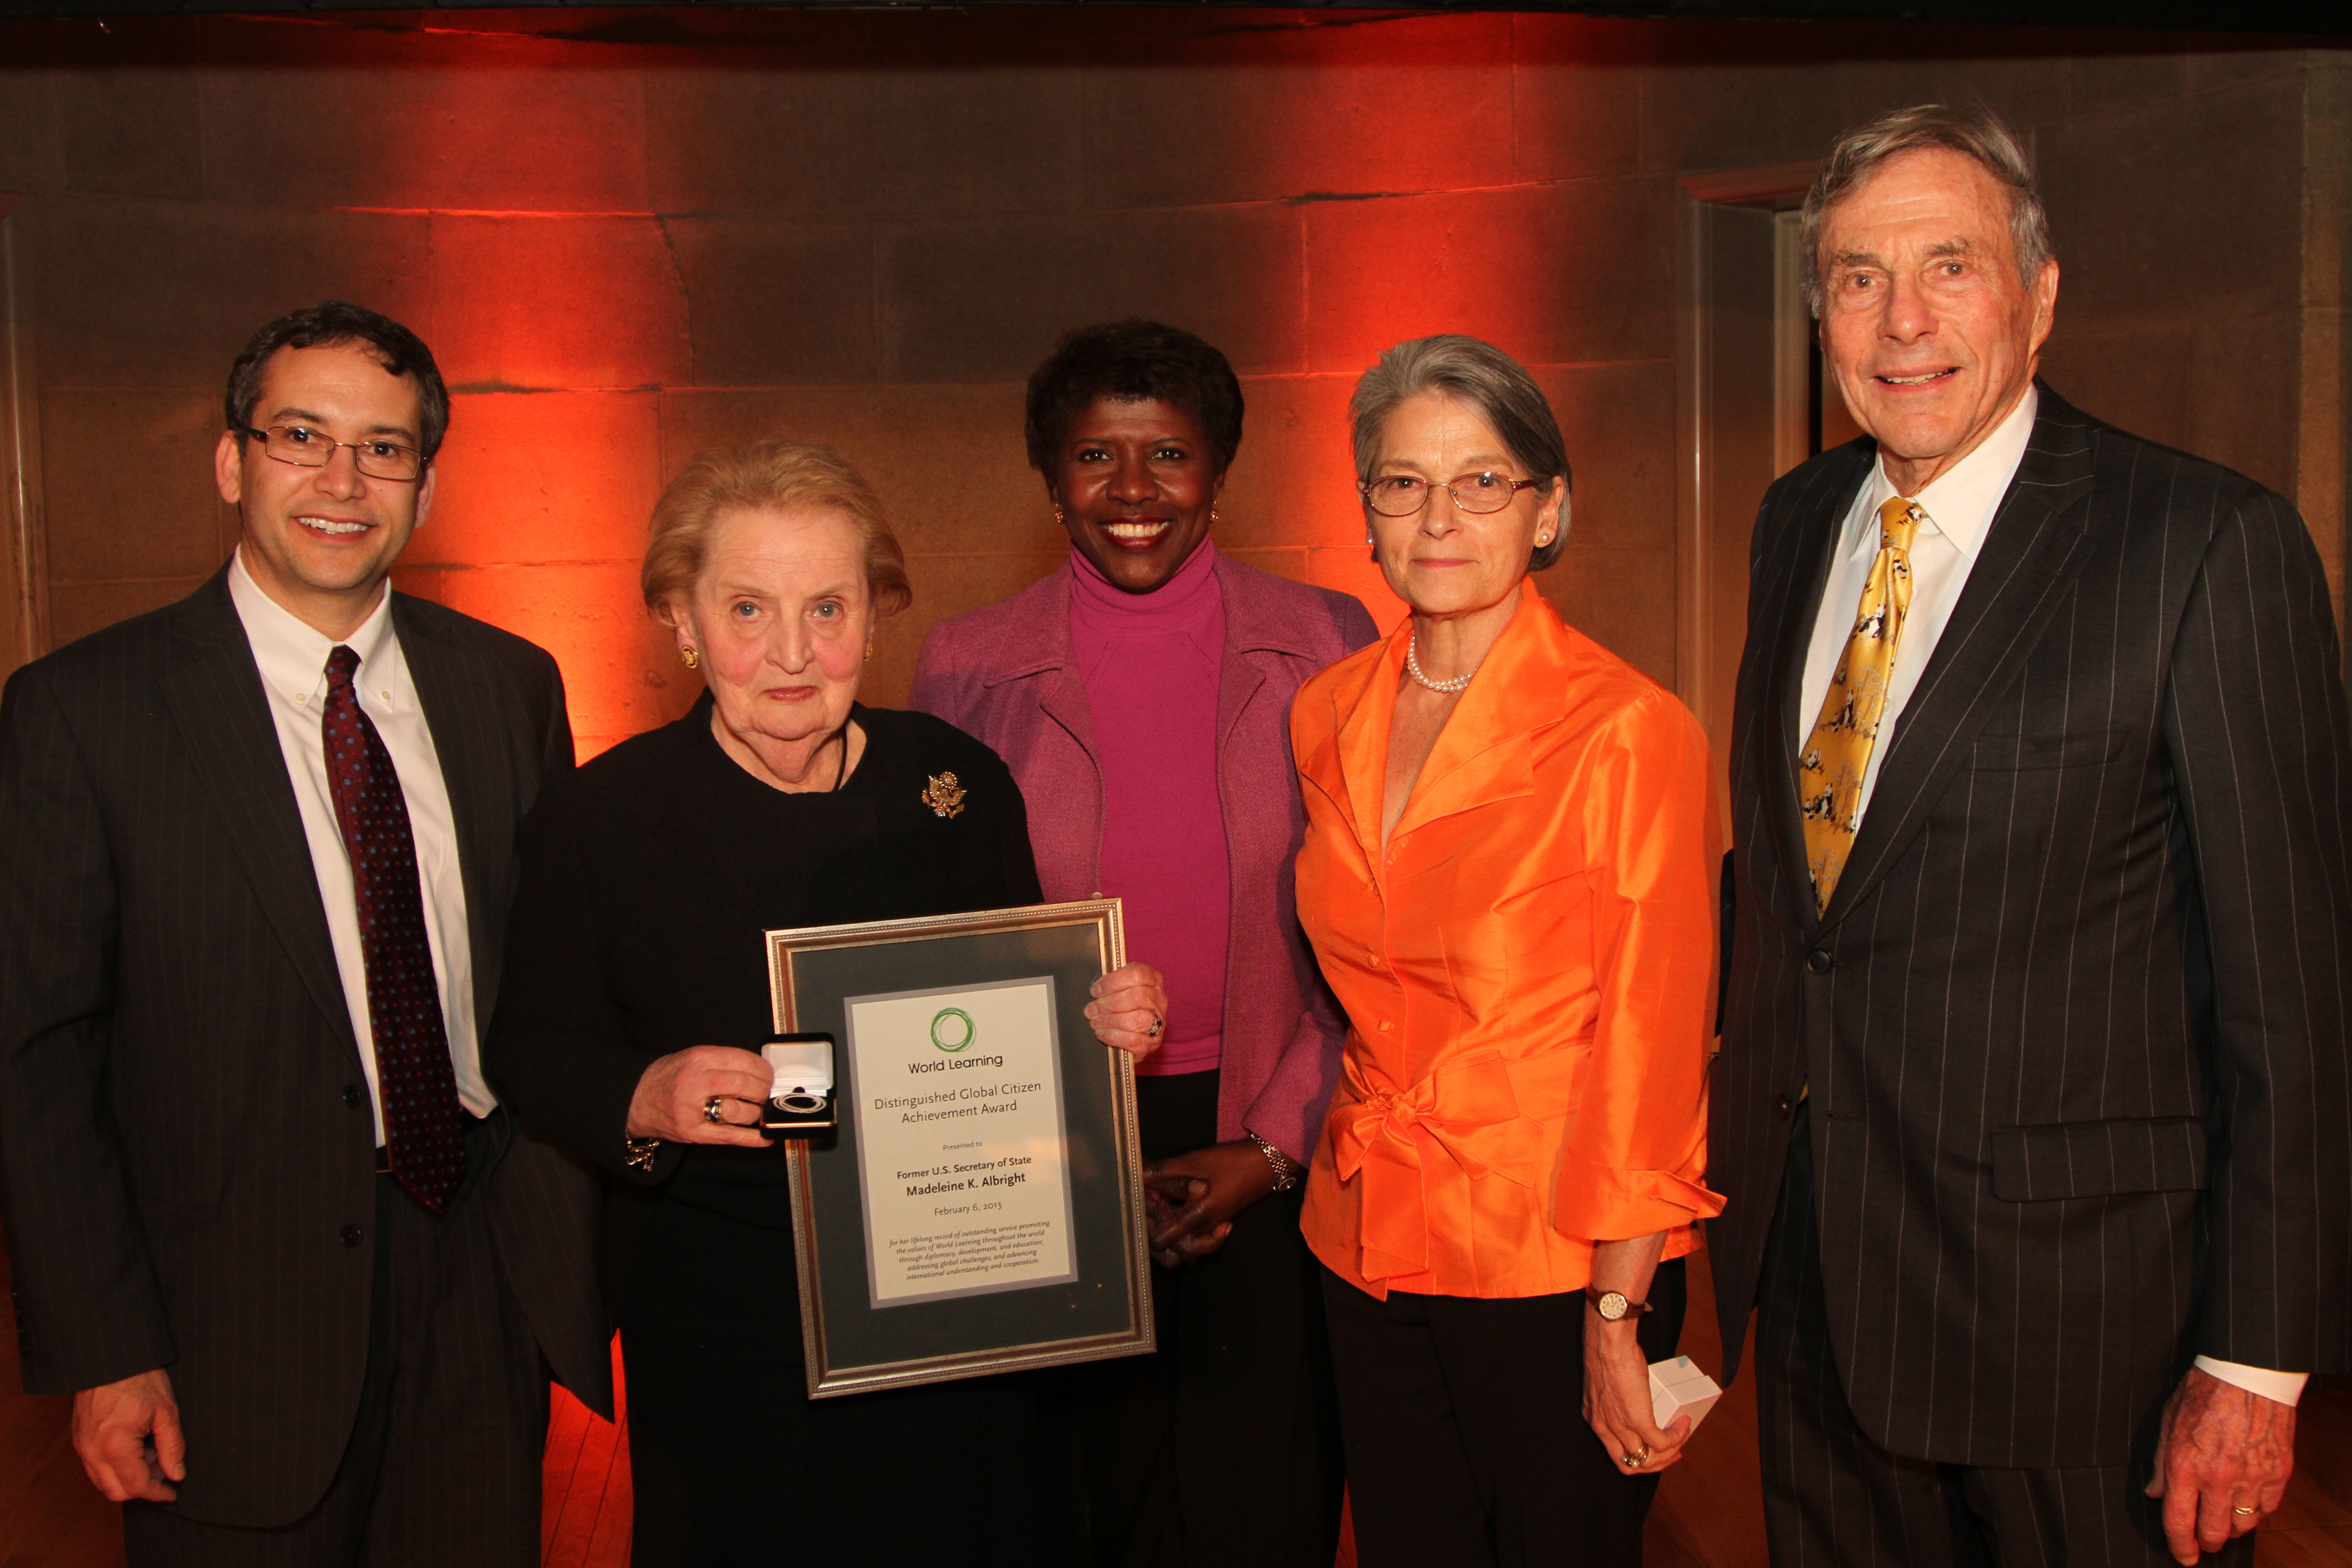 Former US Secretary of State Madeleine Albright honored with Distinguished Global Citizen Achievement Award